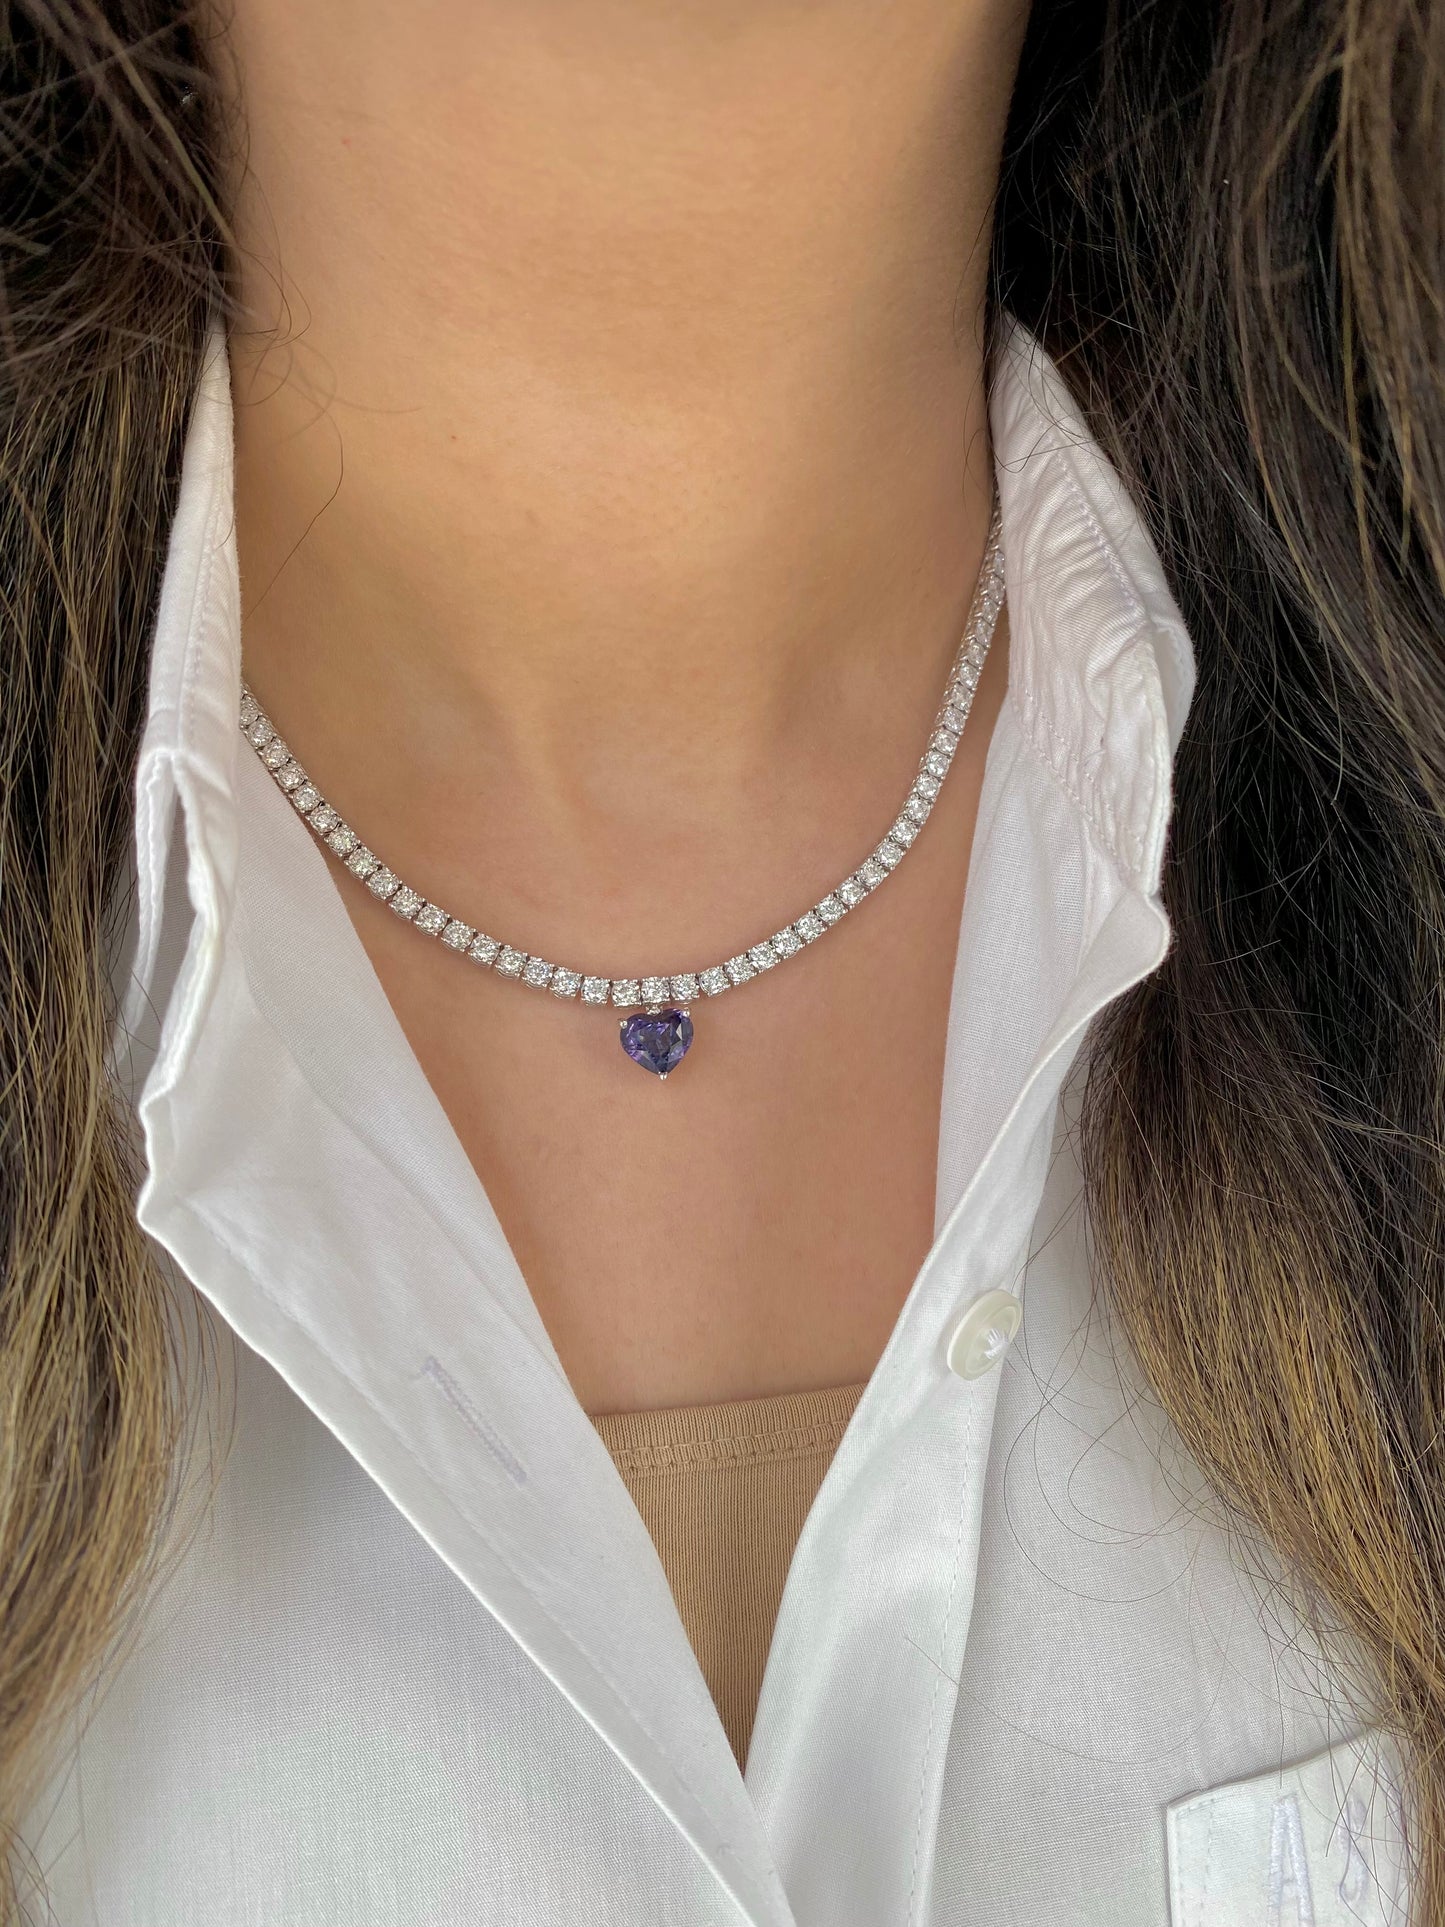 Diamond Tennis Necklace with Detachable Heart Spinel